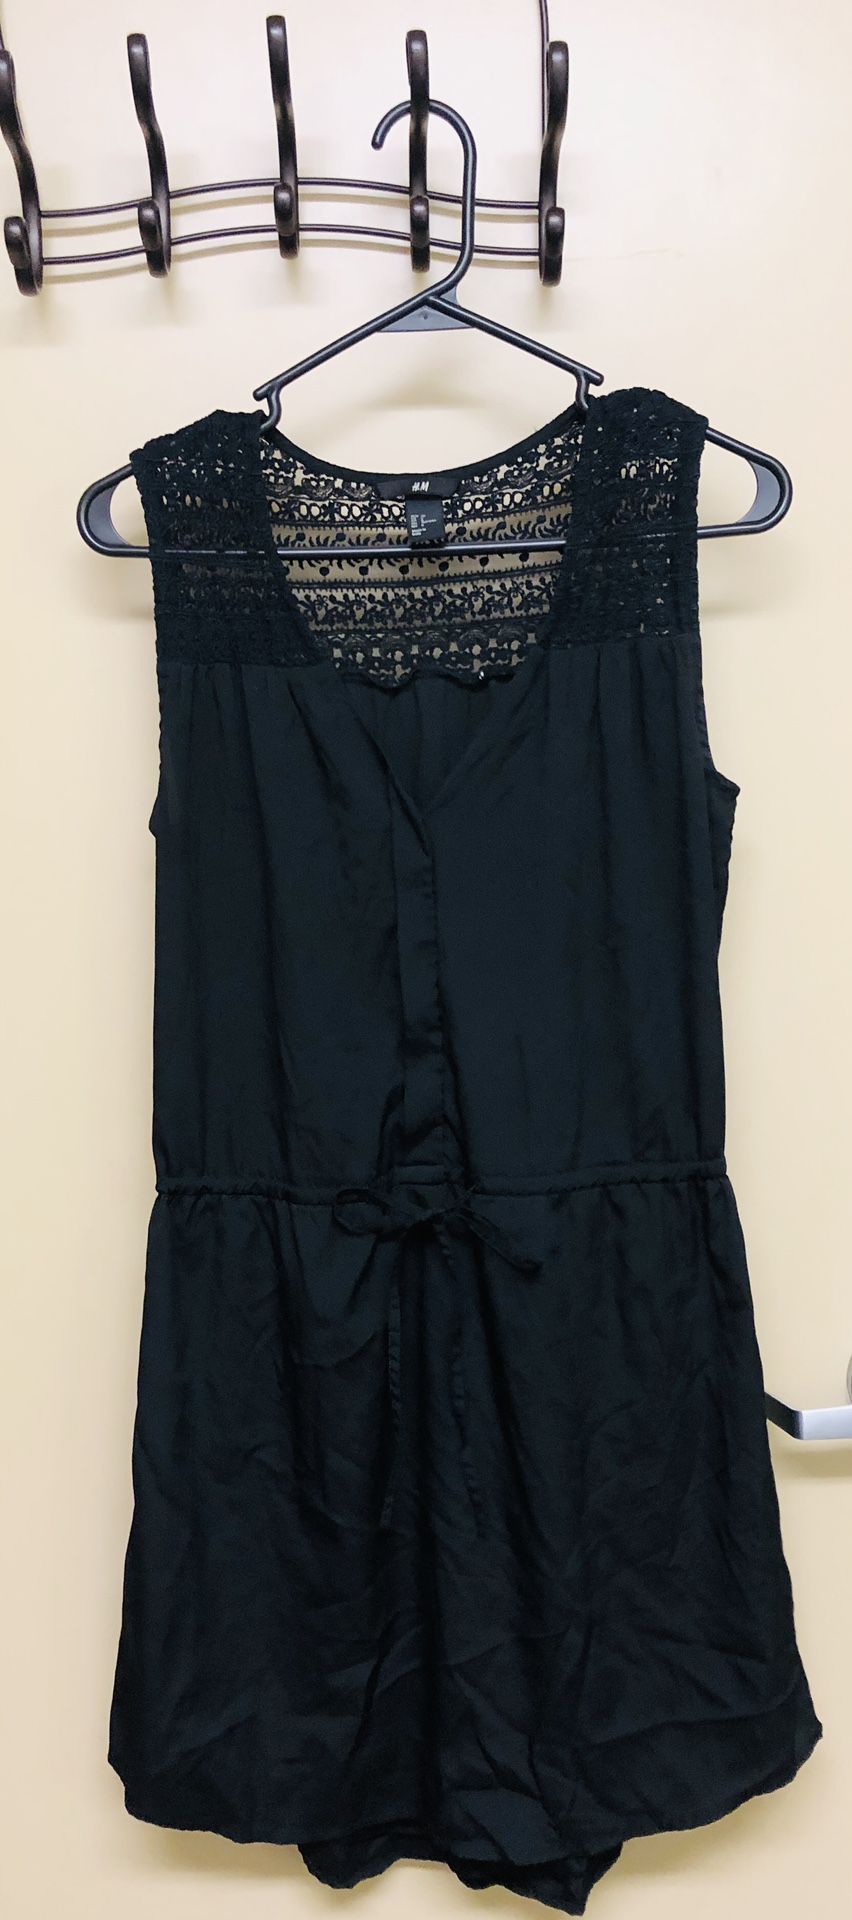 Black laced top ‘H&M’ professional/business dress (size 6)